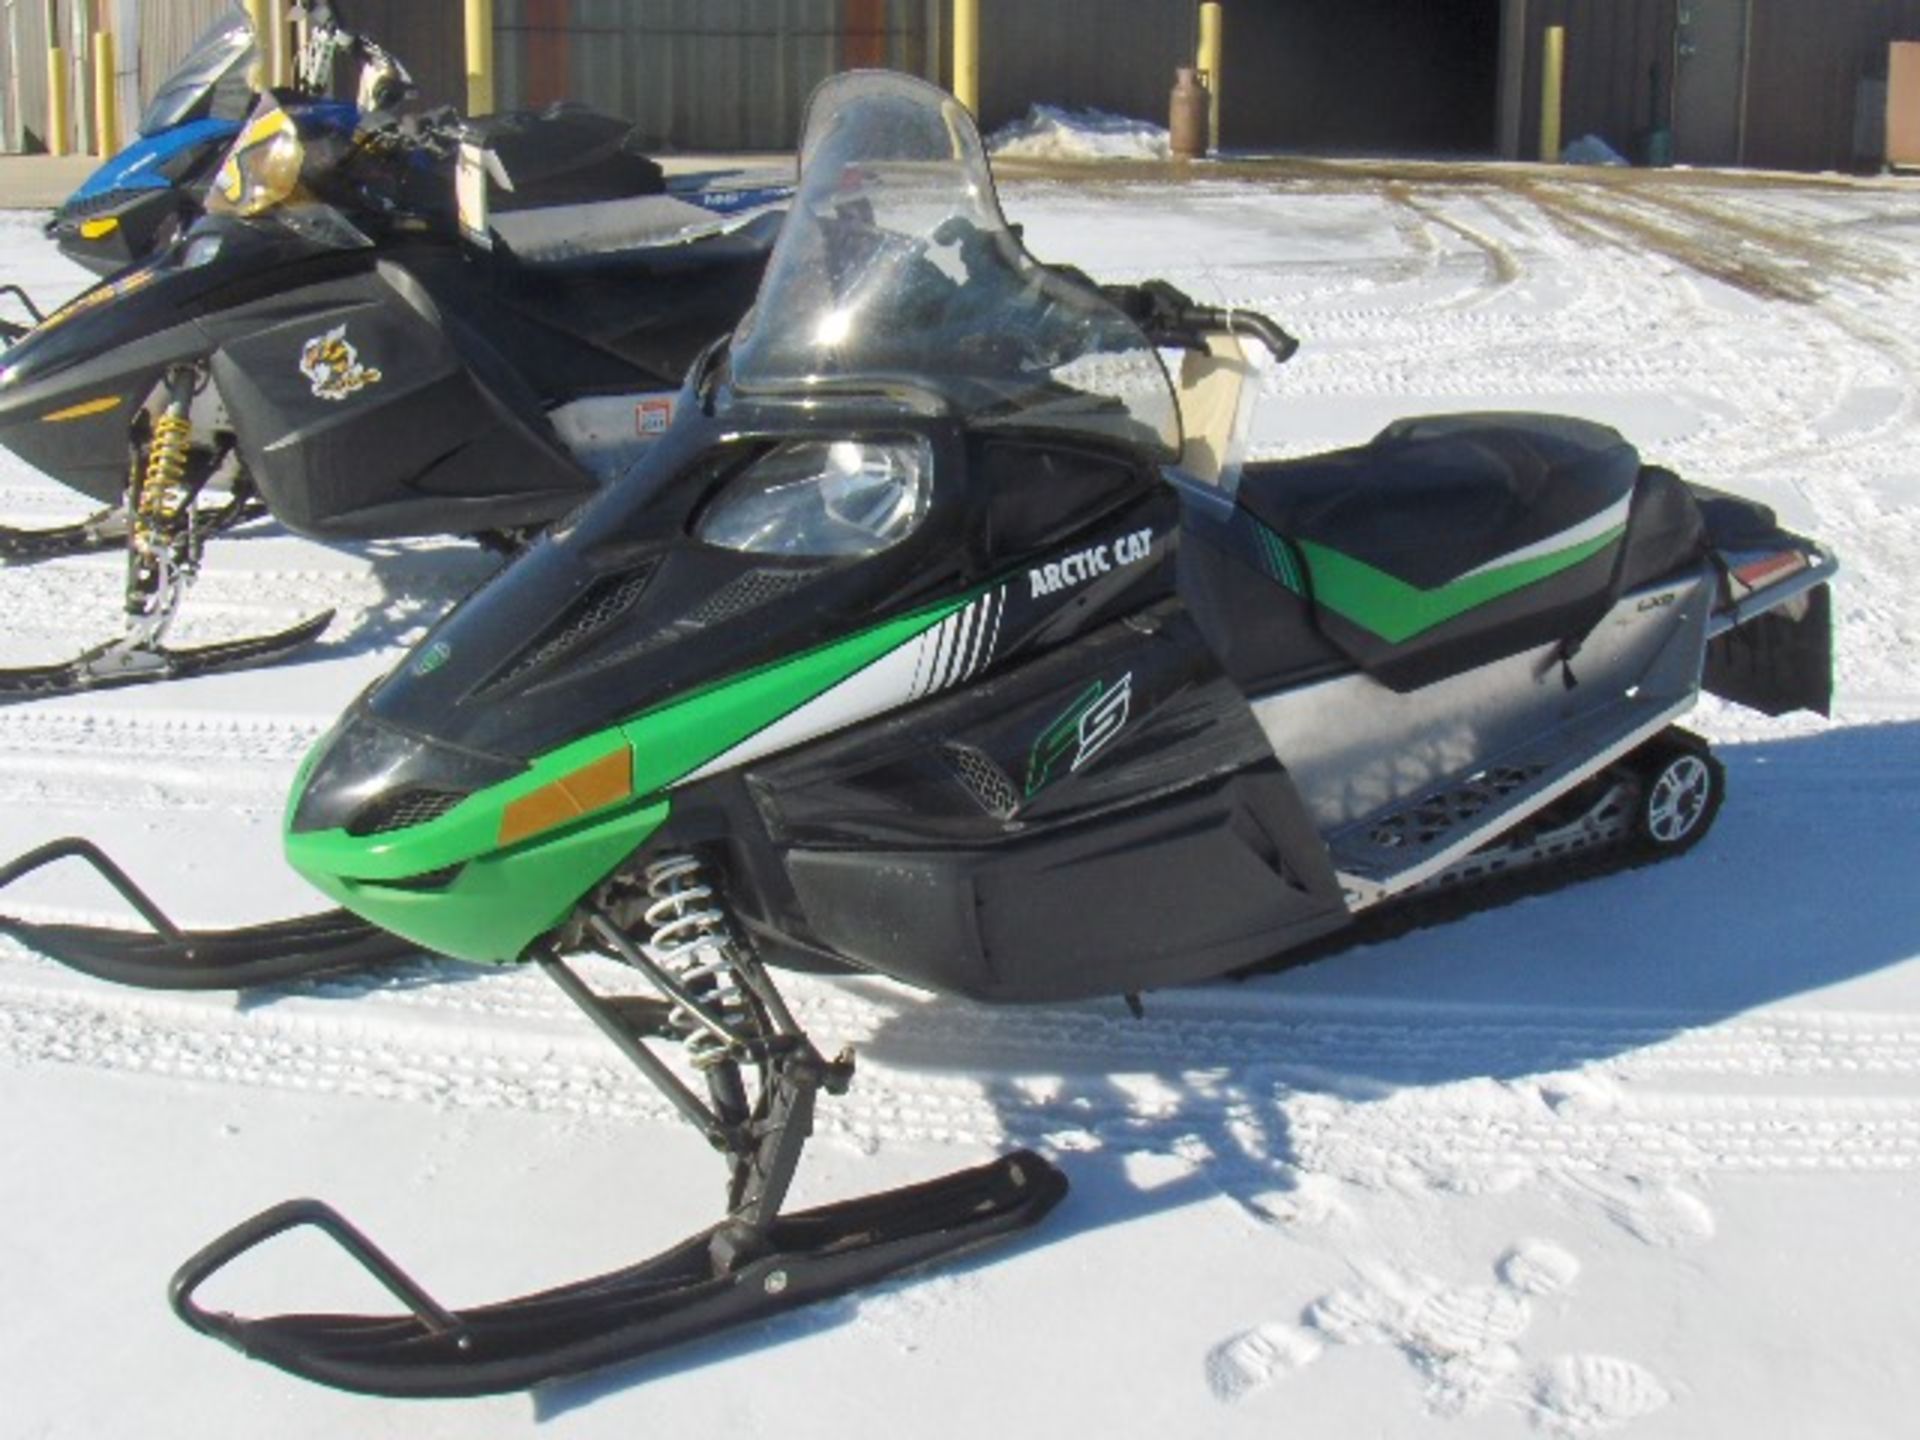 2012 ARCTIC CAQT 500 F5 LXR  4UF12SNWXCT123811 snowmobile, owner started at time of auction check